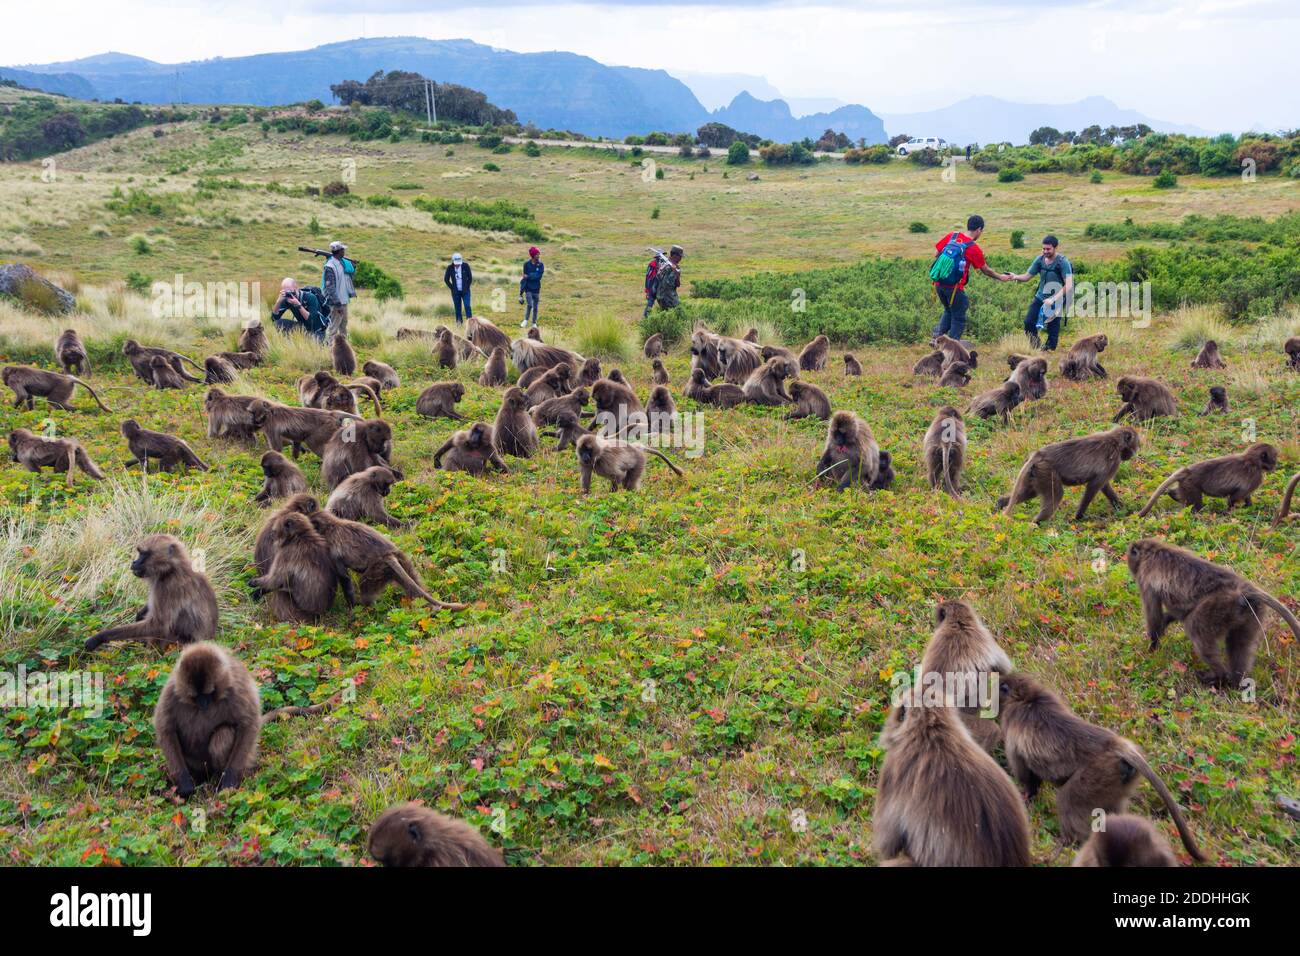 Debark, Ethiopia - Nov 2018: People observing and photographing baboon monkeys in Simien Mountains national park and two scouts with rifles Stock Photo